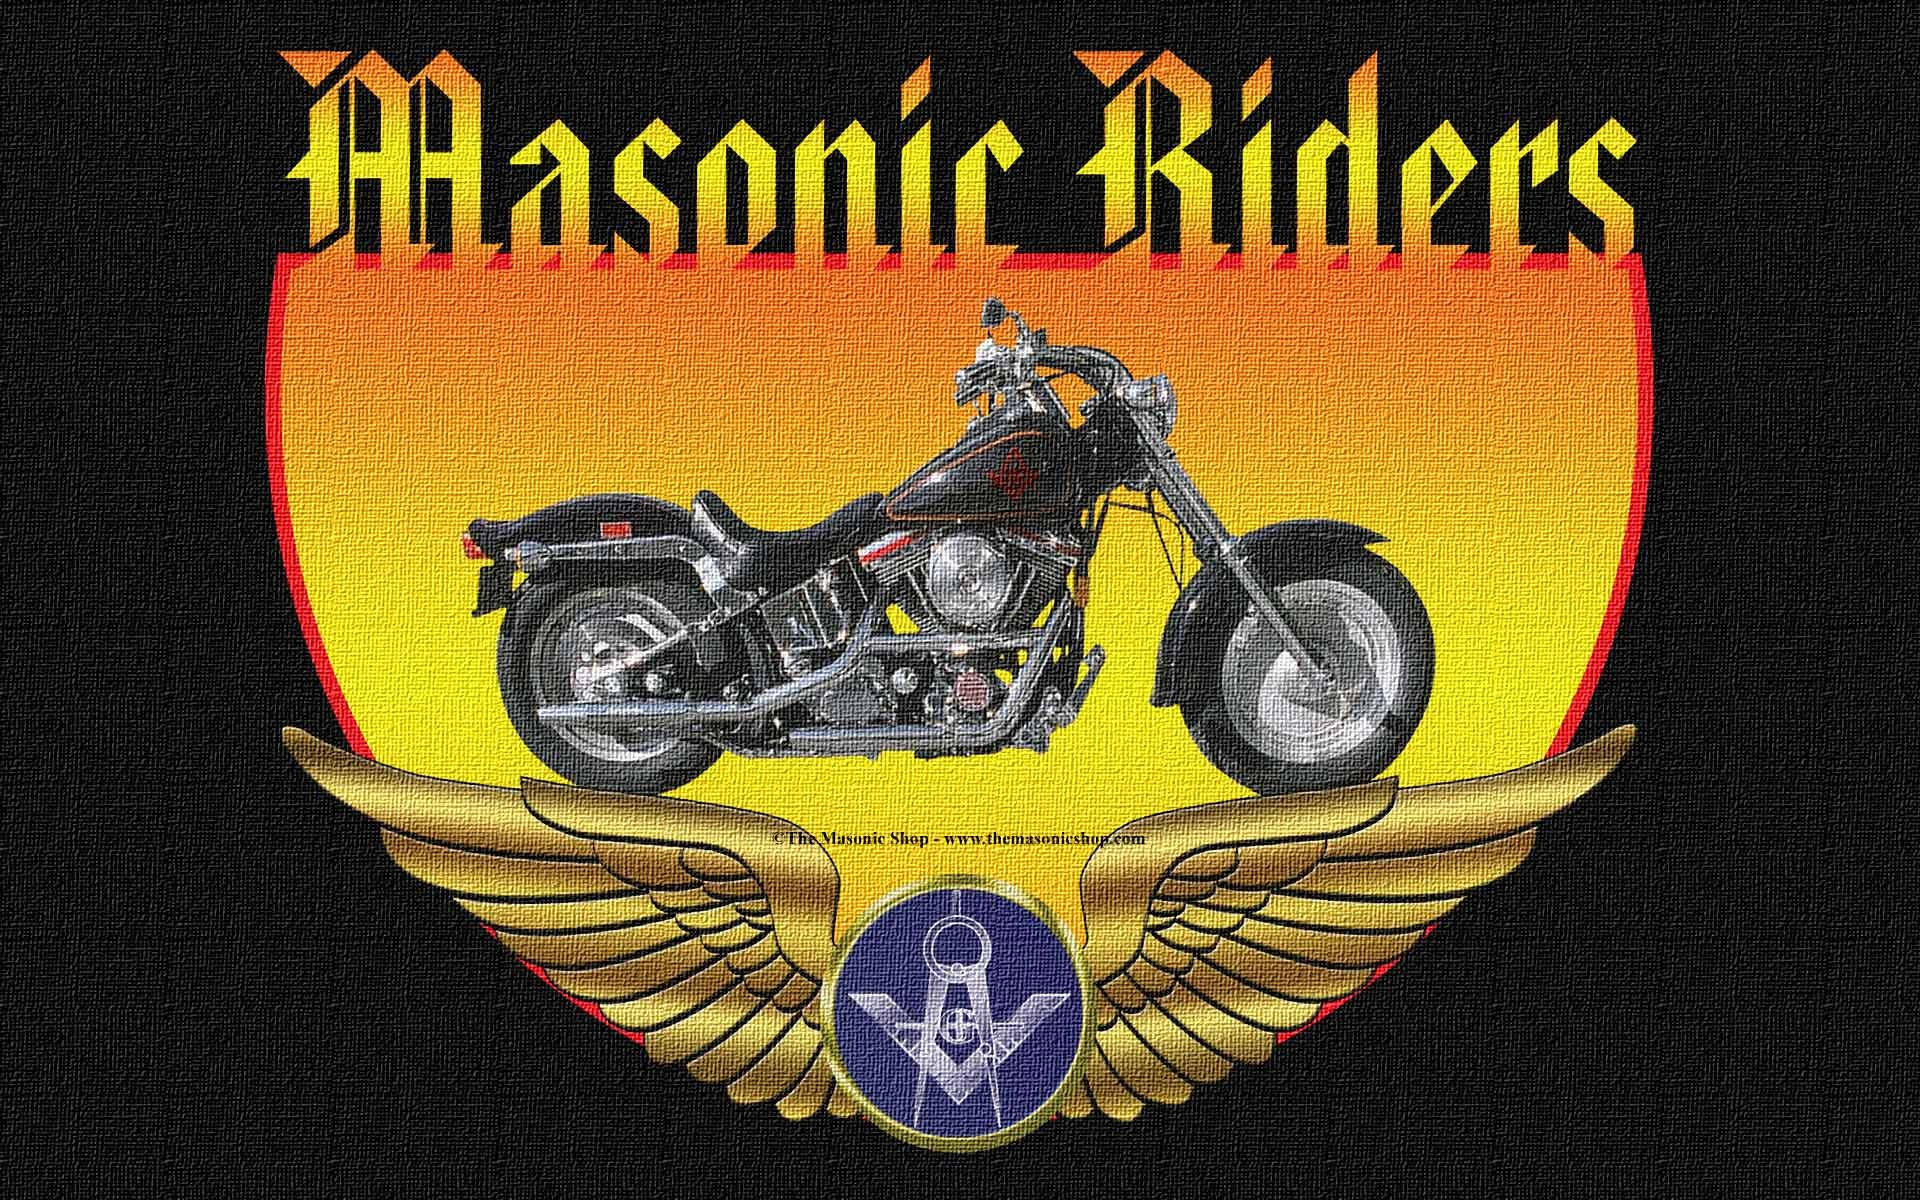 Masonic Riders With Black Motorcycle Background